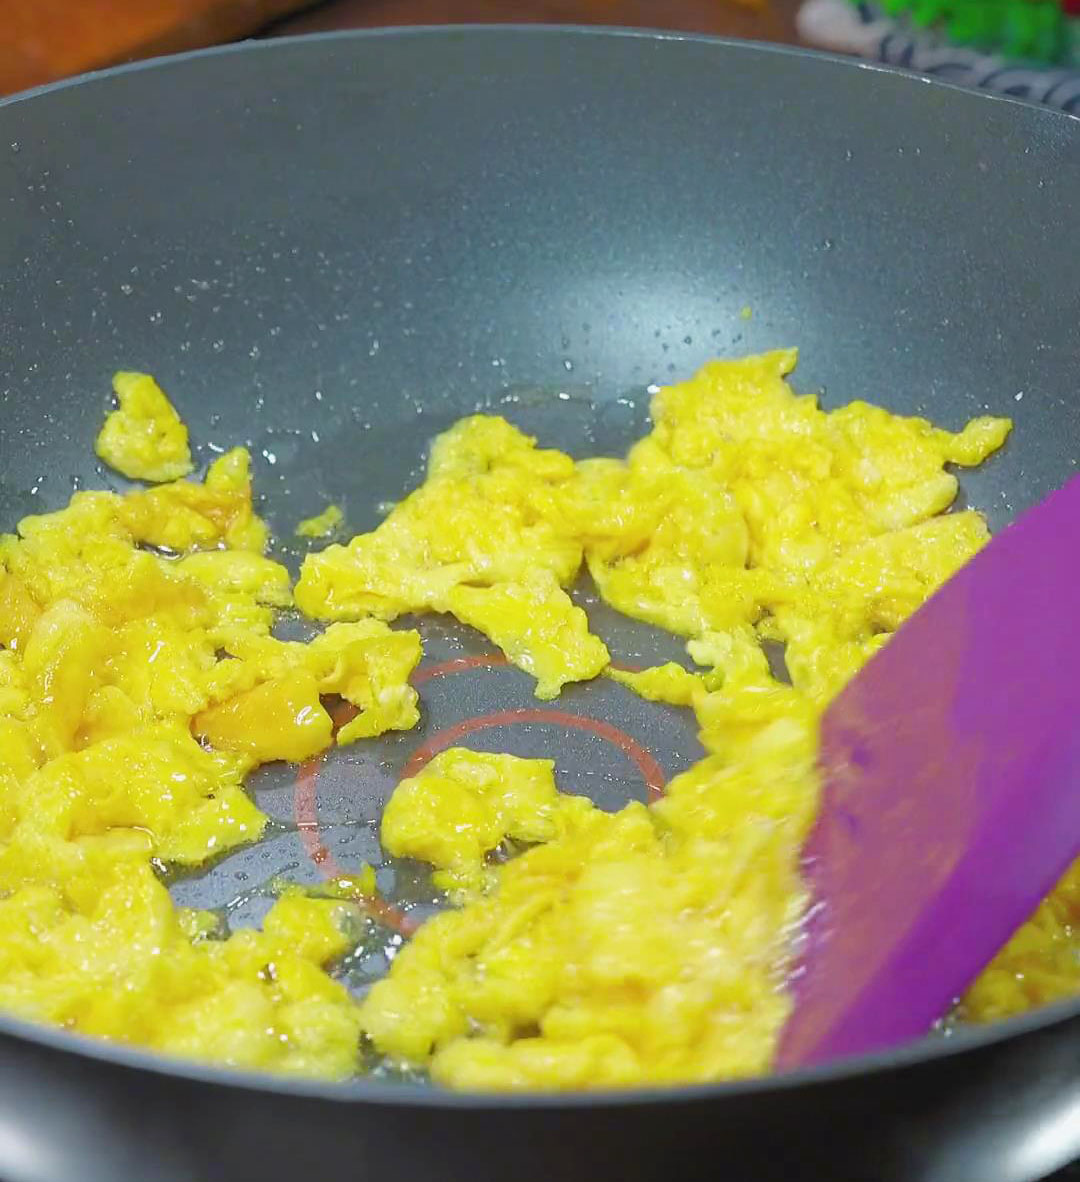 cook the eggs until fluffy